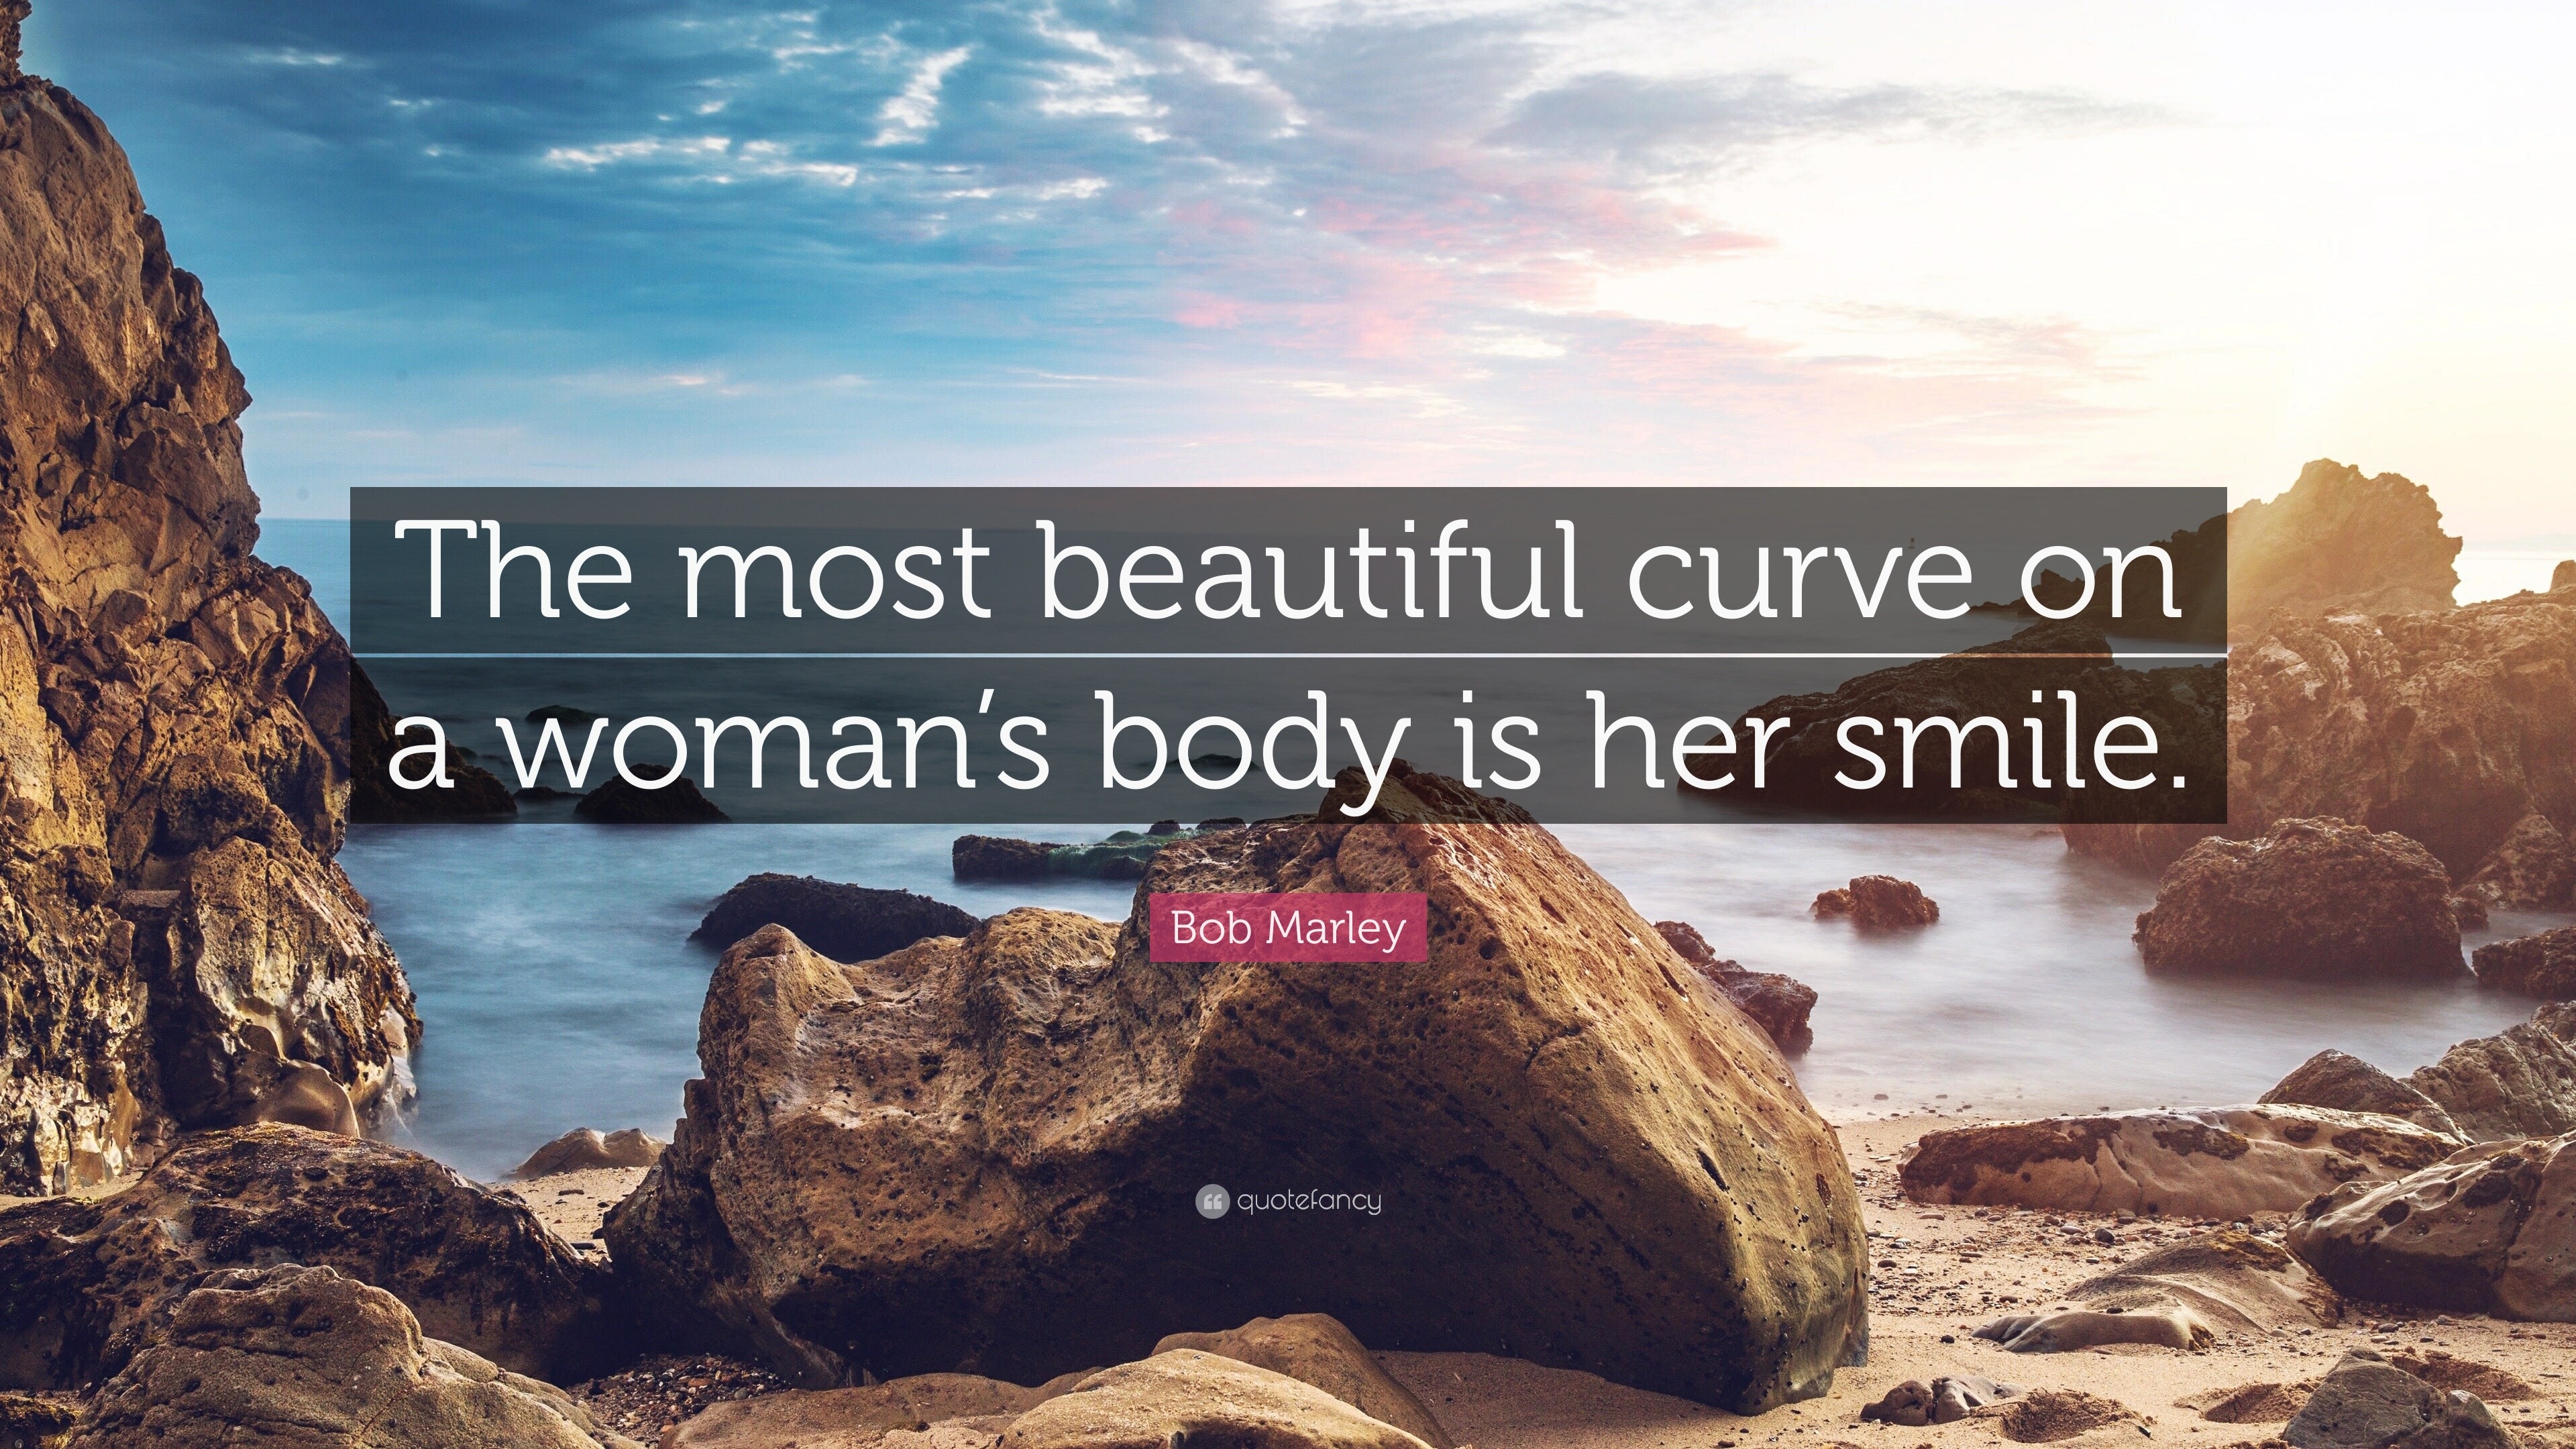 https://quotefancy.com/media/wallpaper/3840x2160/1729444-Bob-Marley-Quote-The-most-beautiful-curve-on-a-woman-s-body-is-her.jpg